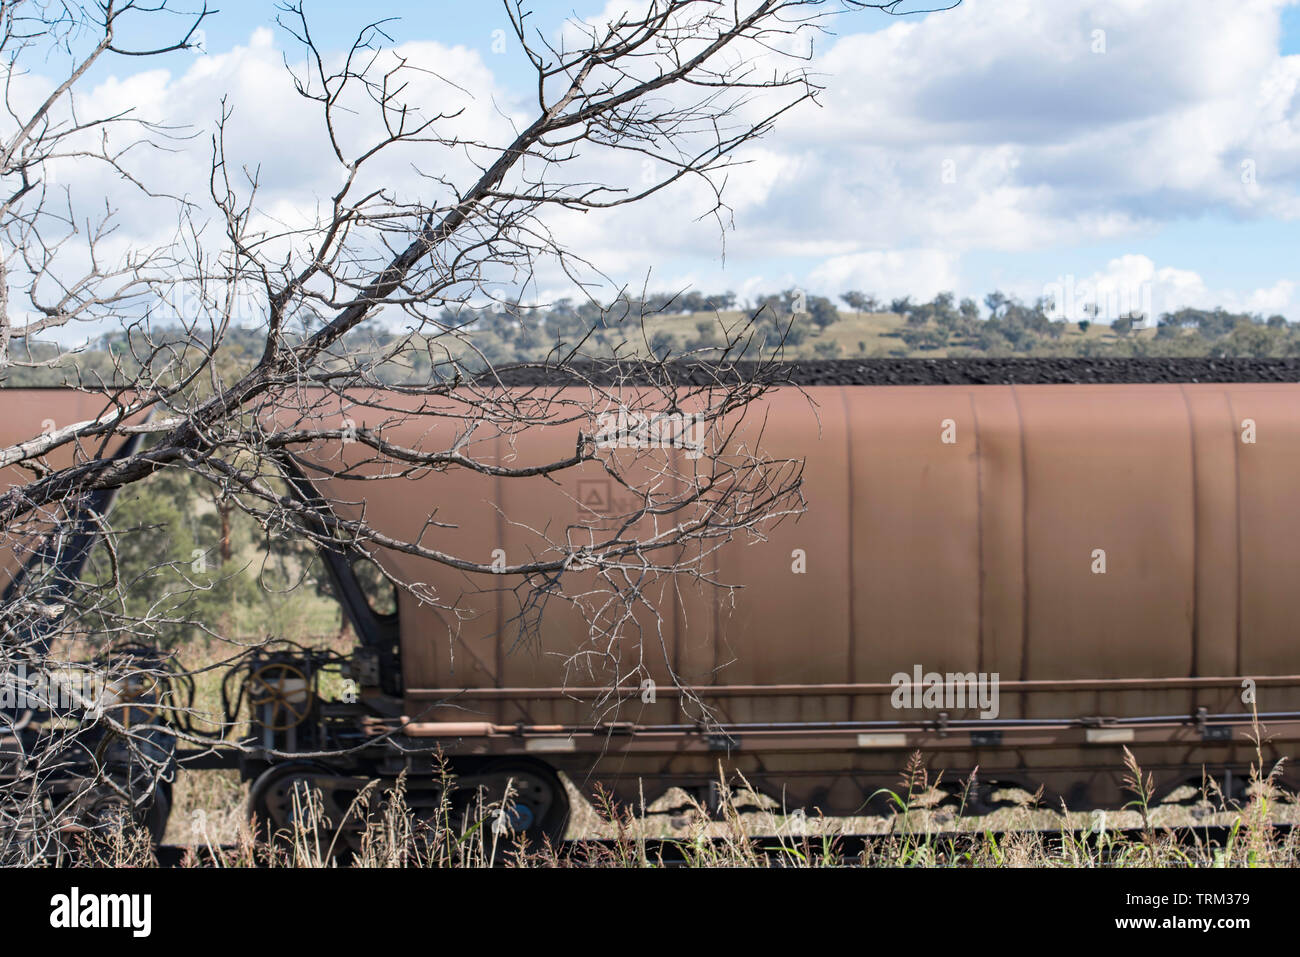 Rail freight cars carry coal to the port at Newcastle from mines in the upper Hunter Valley in New South Wales, Australia Stock Photo